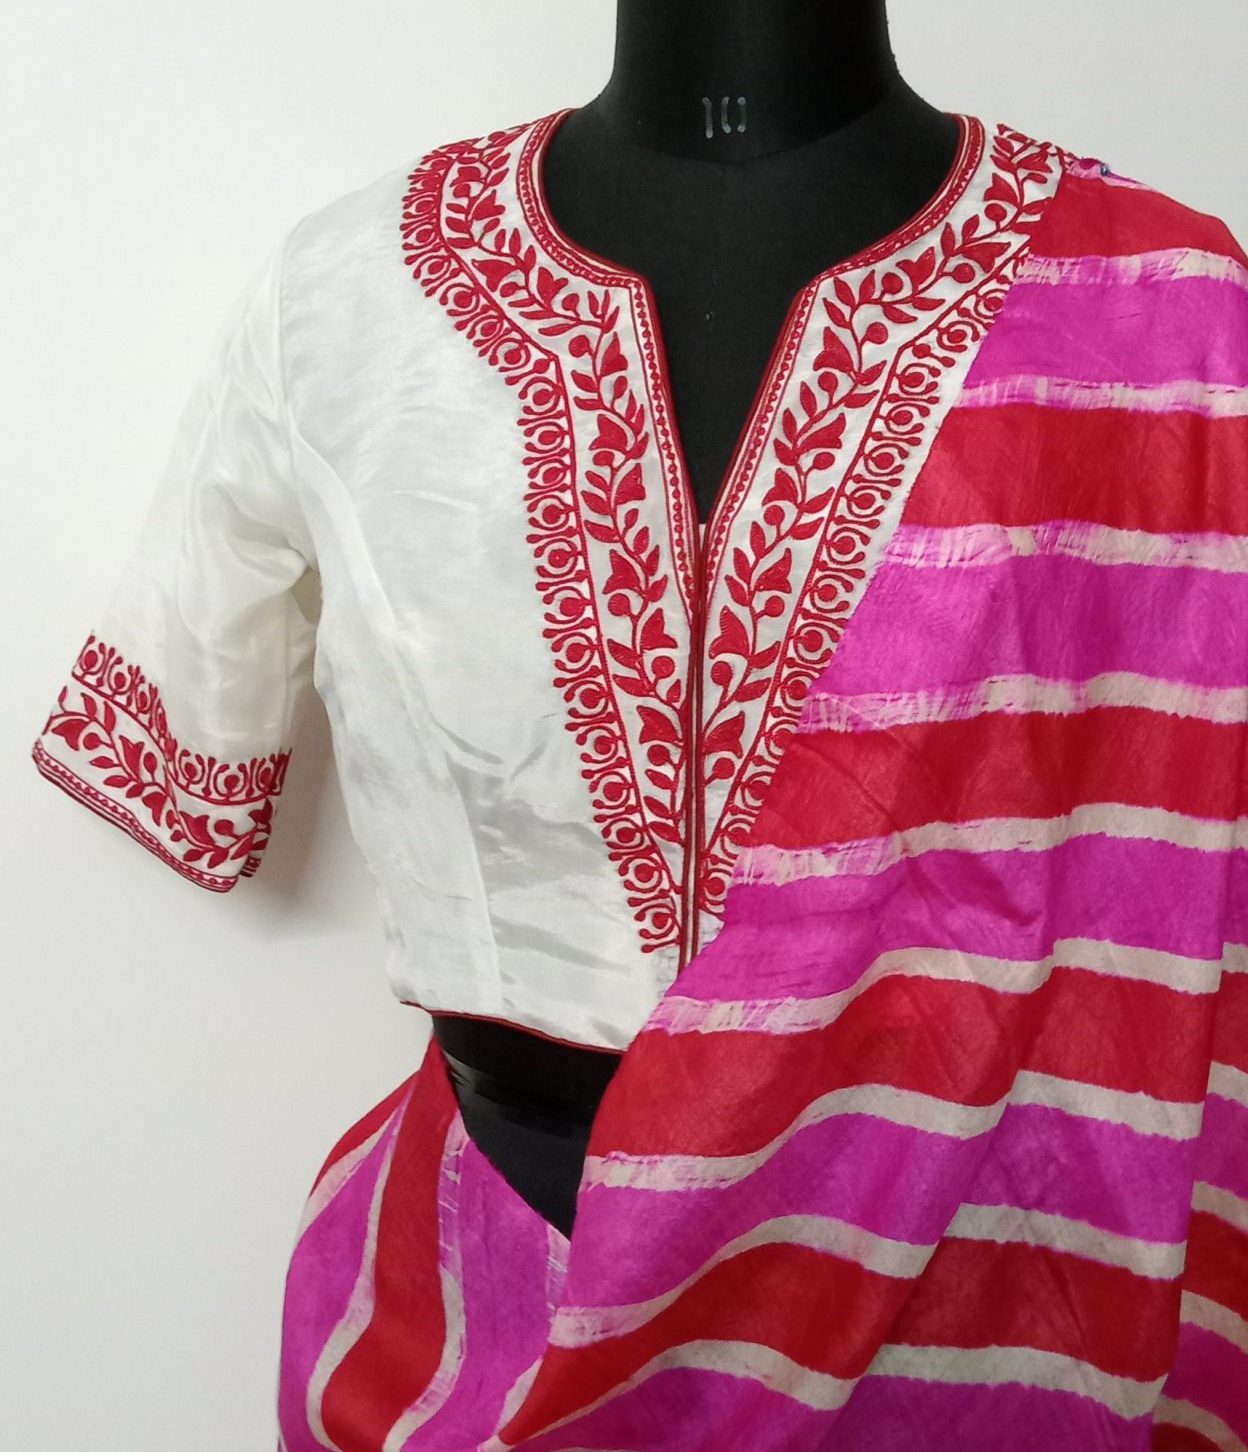 white blouse with red embroidery